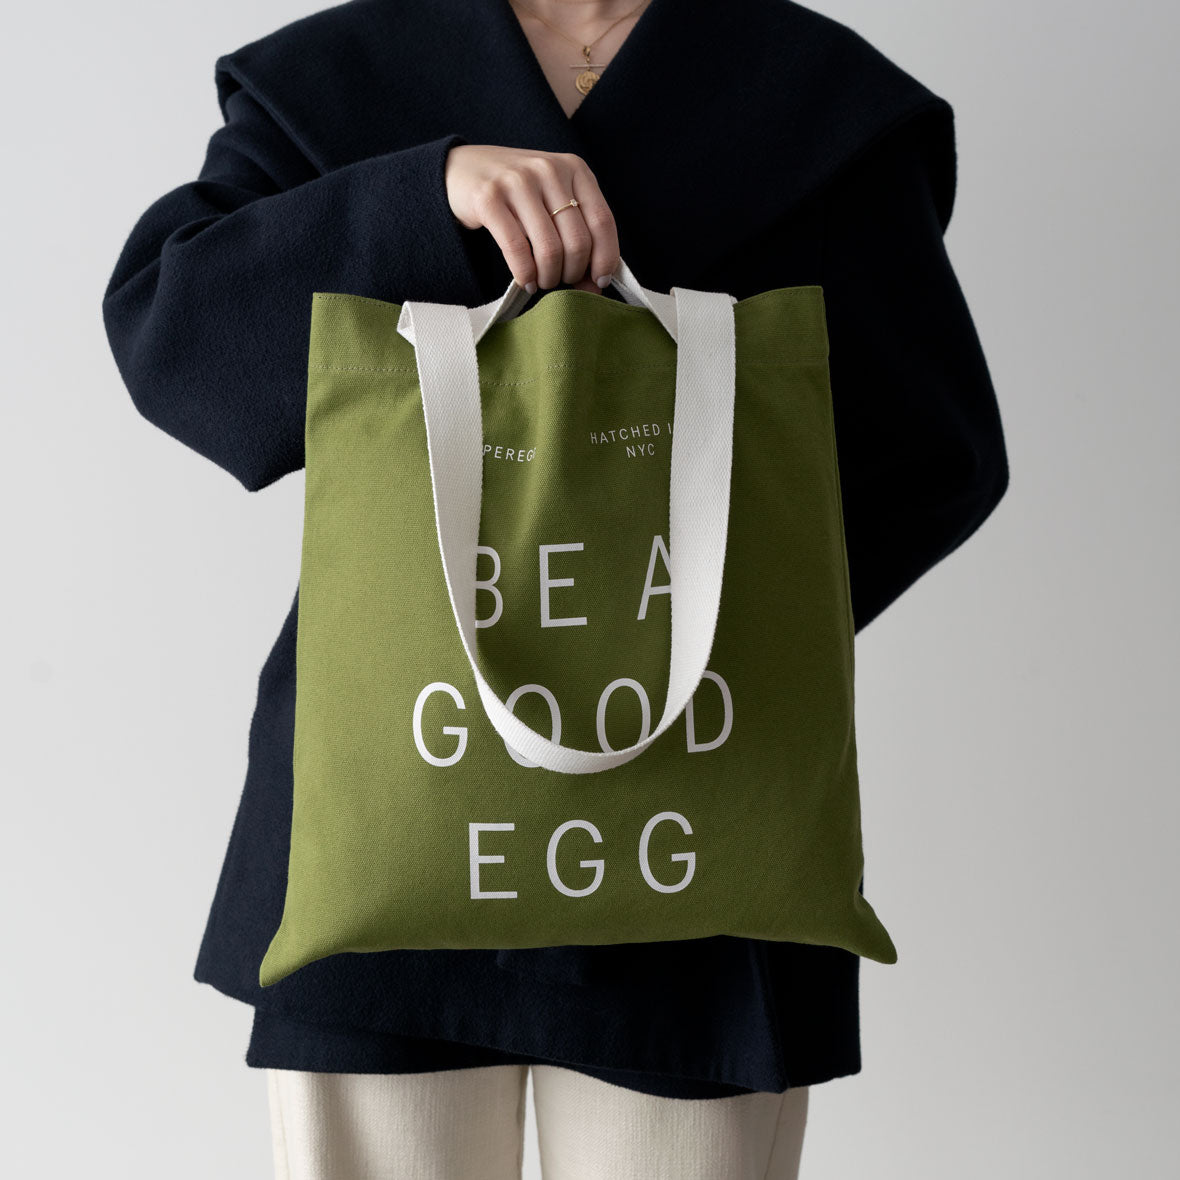 Look on the Bright Side - Fried Egg | Tote Bag